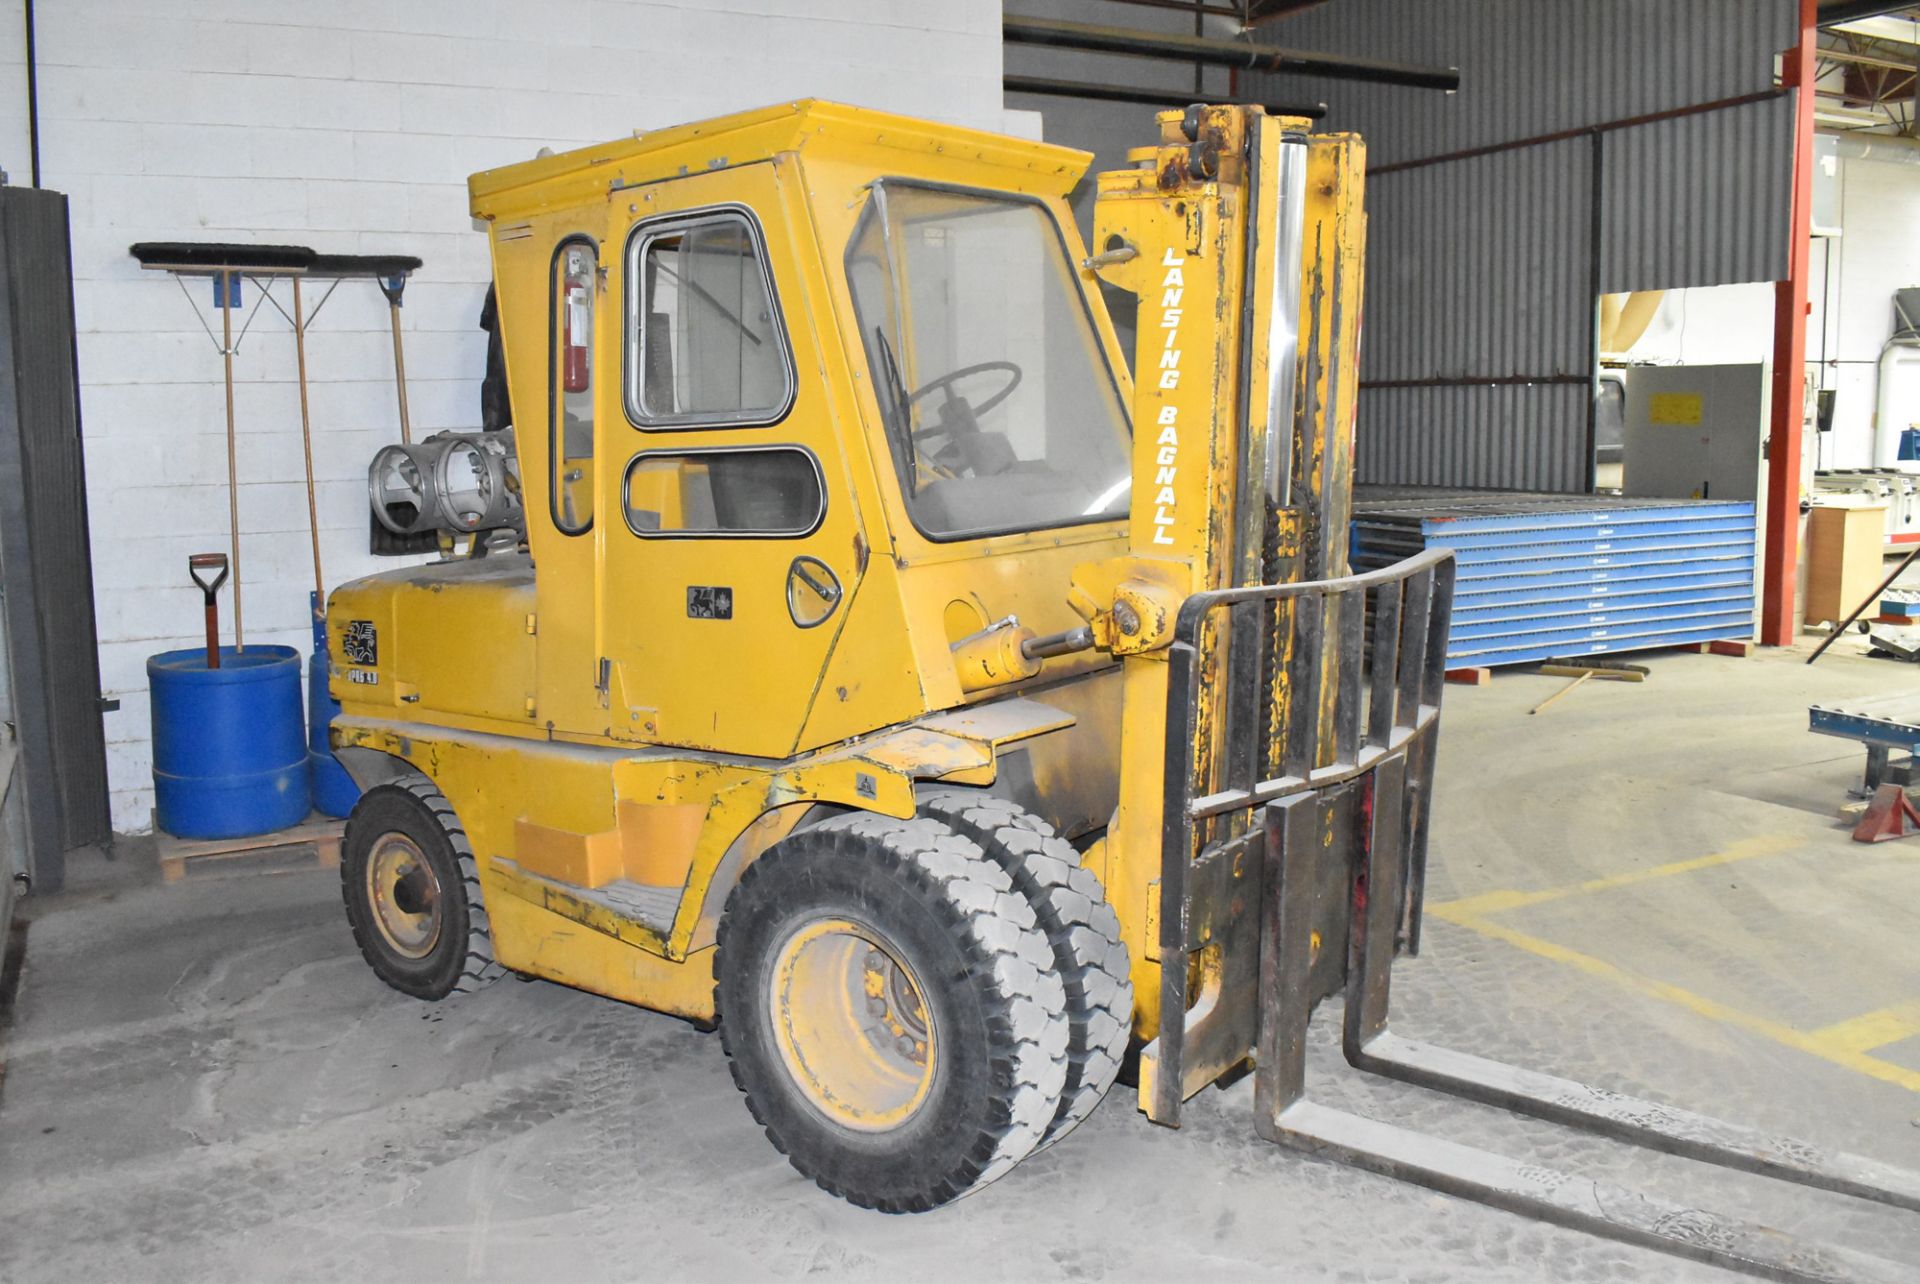 LANSING BAGNALL FOPR6 4.0 LPG OUTDOOR FORKLIFT WITH 8000 LB. CAPACITY, 185" MAX. LIFT HEIGHT, - Image 4 of 8